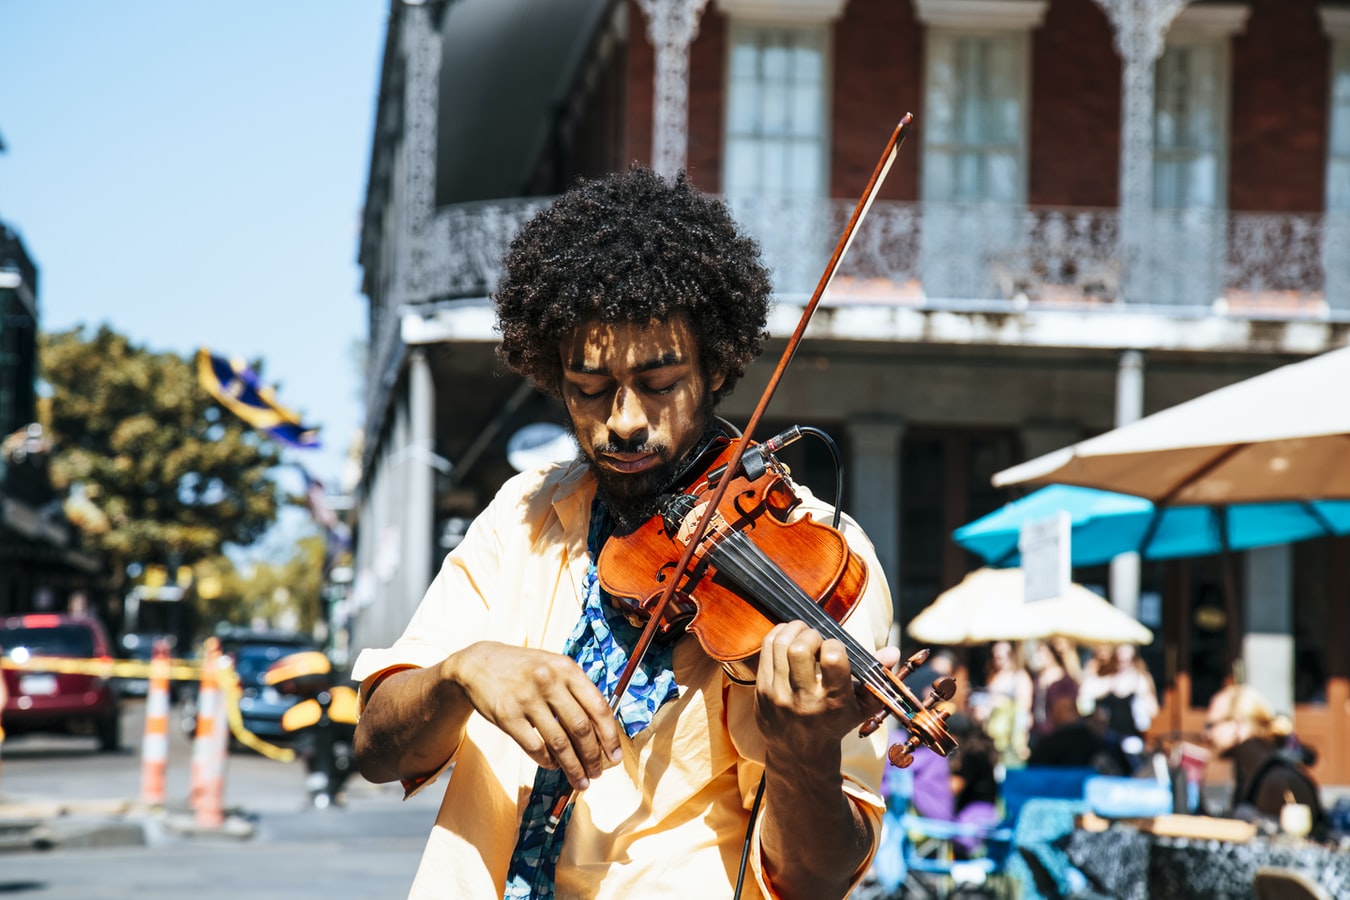 An African-American man playing the violin